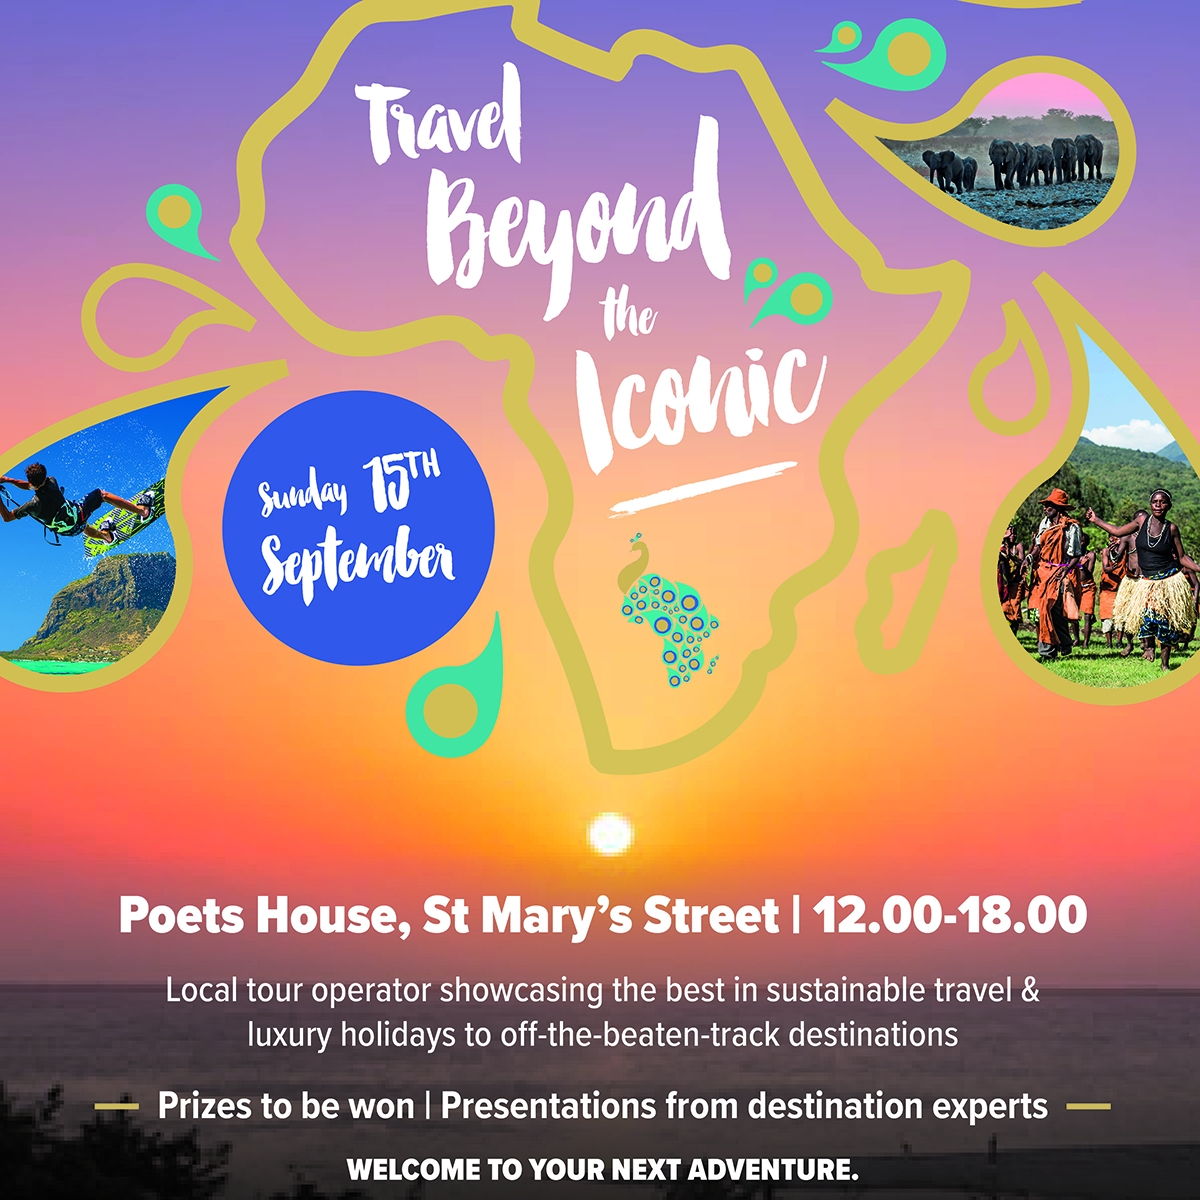 Sustainable Travel Event - 15th September 2019